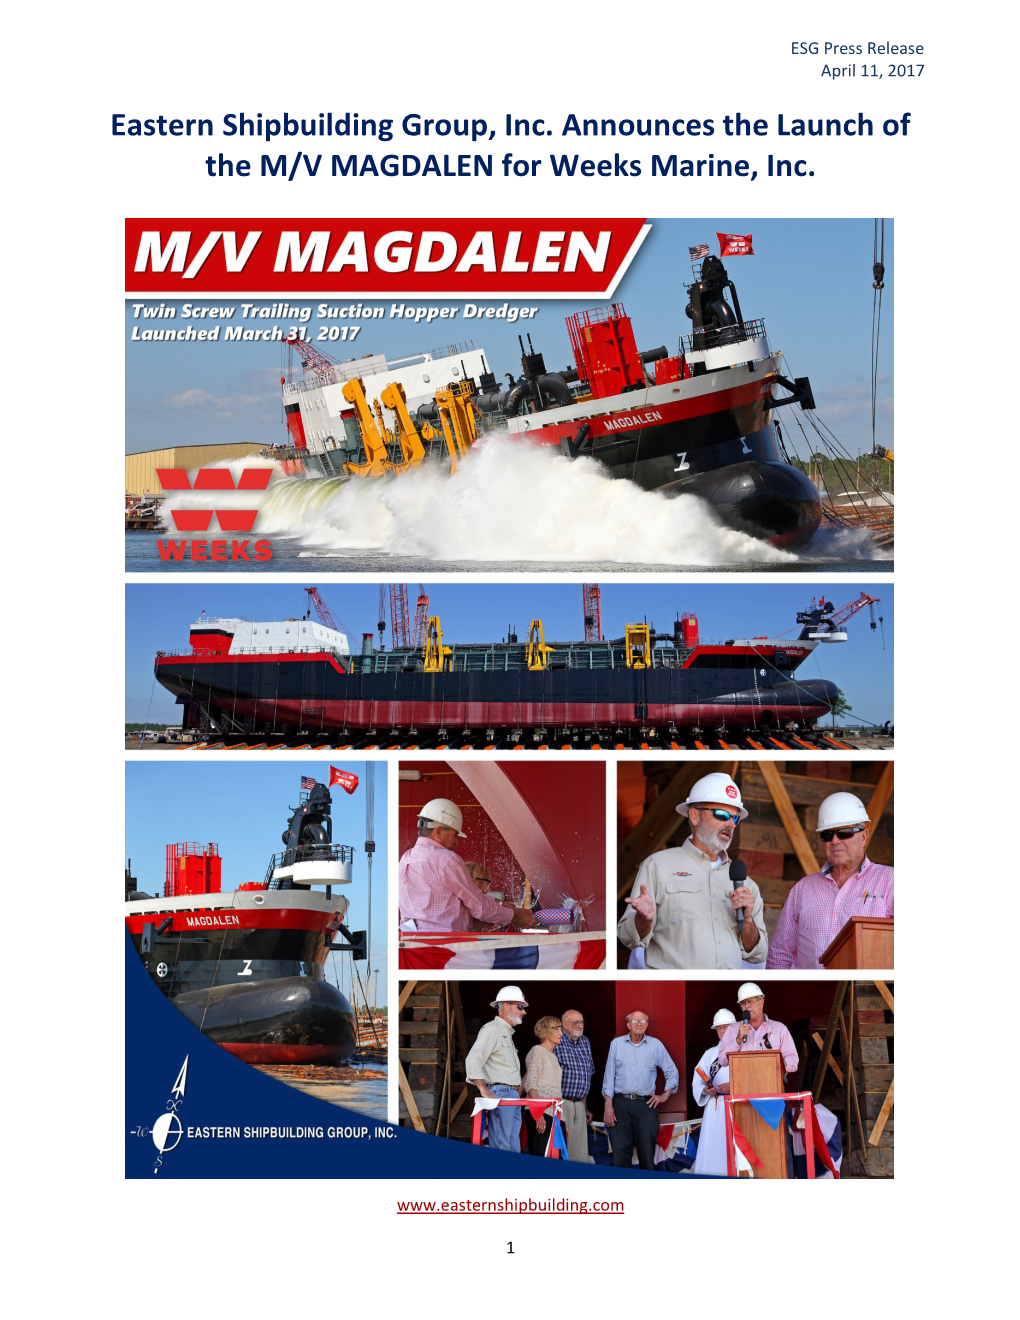 Eastern Shipbuilding Group, Inc. Announces the Launch of the M/V MAGDALEN for Weeks Marine, Inc